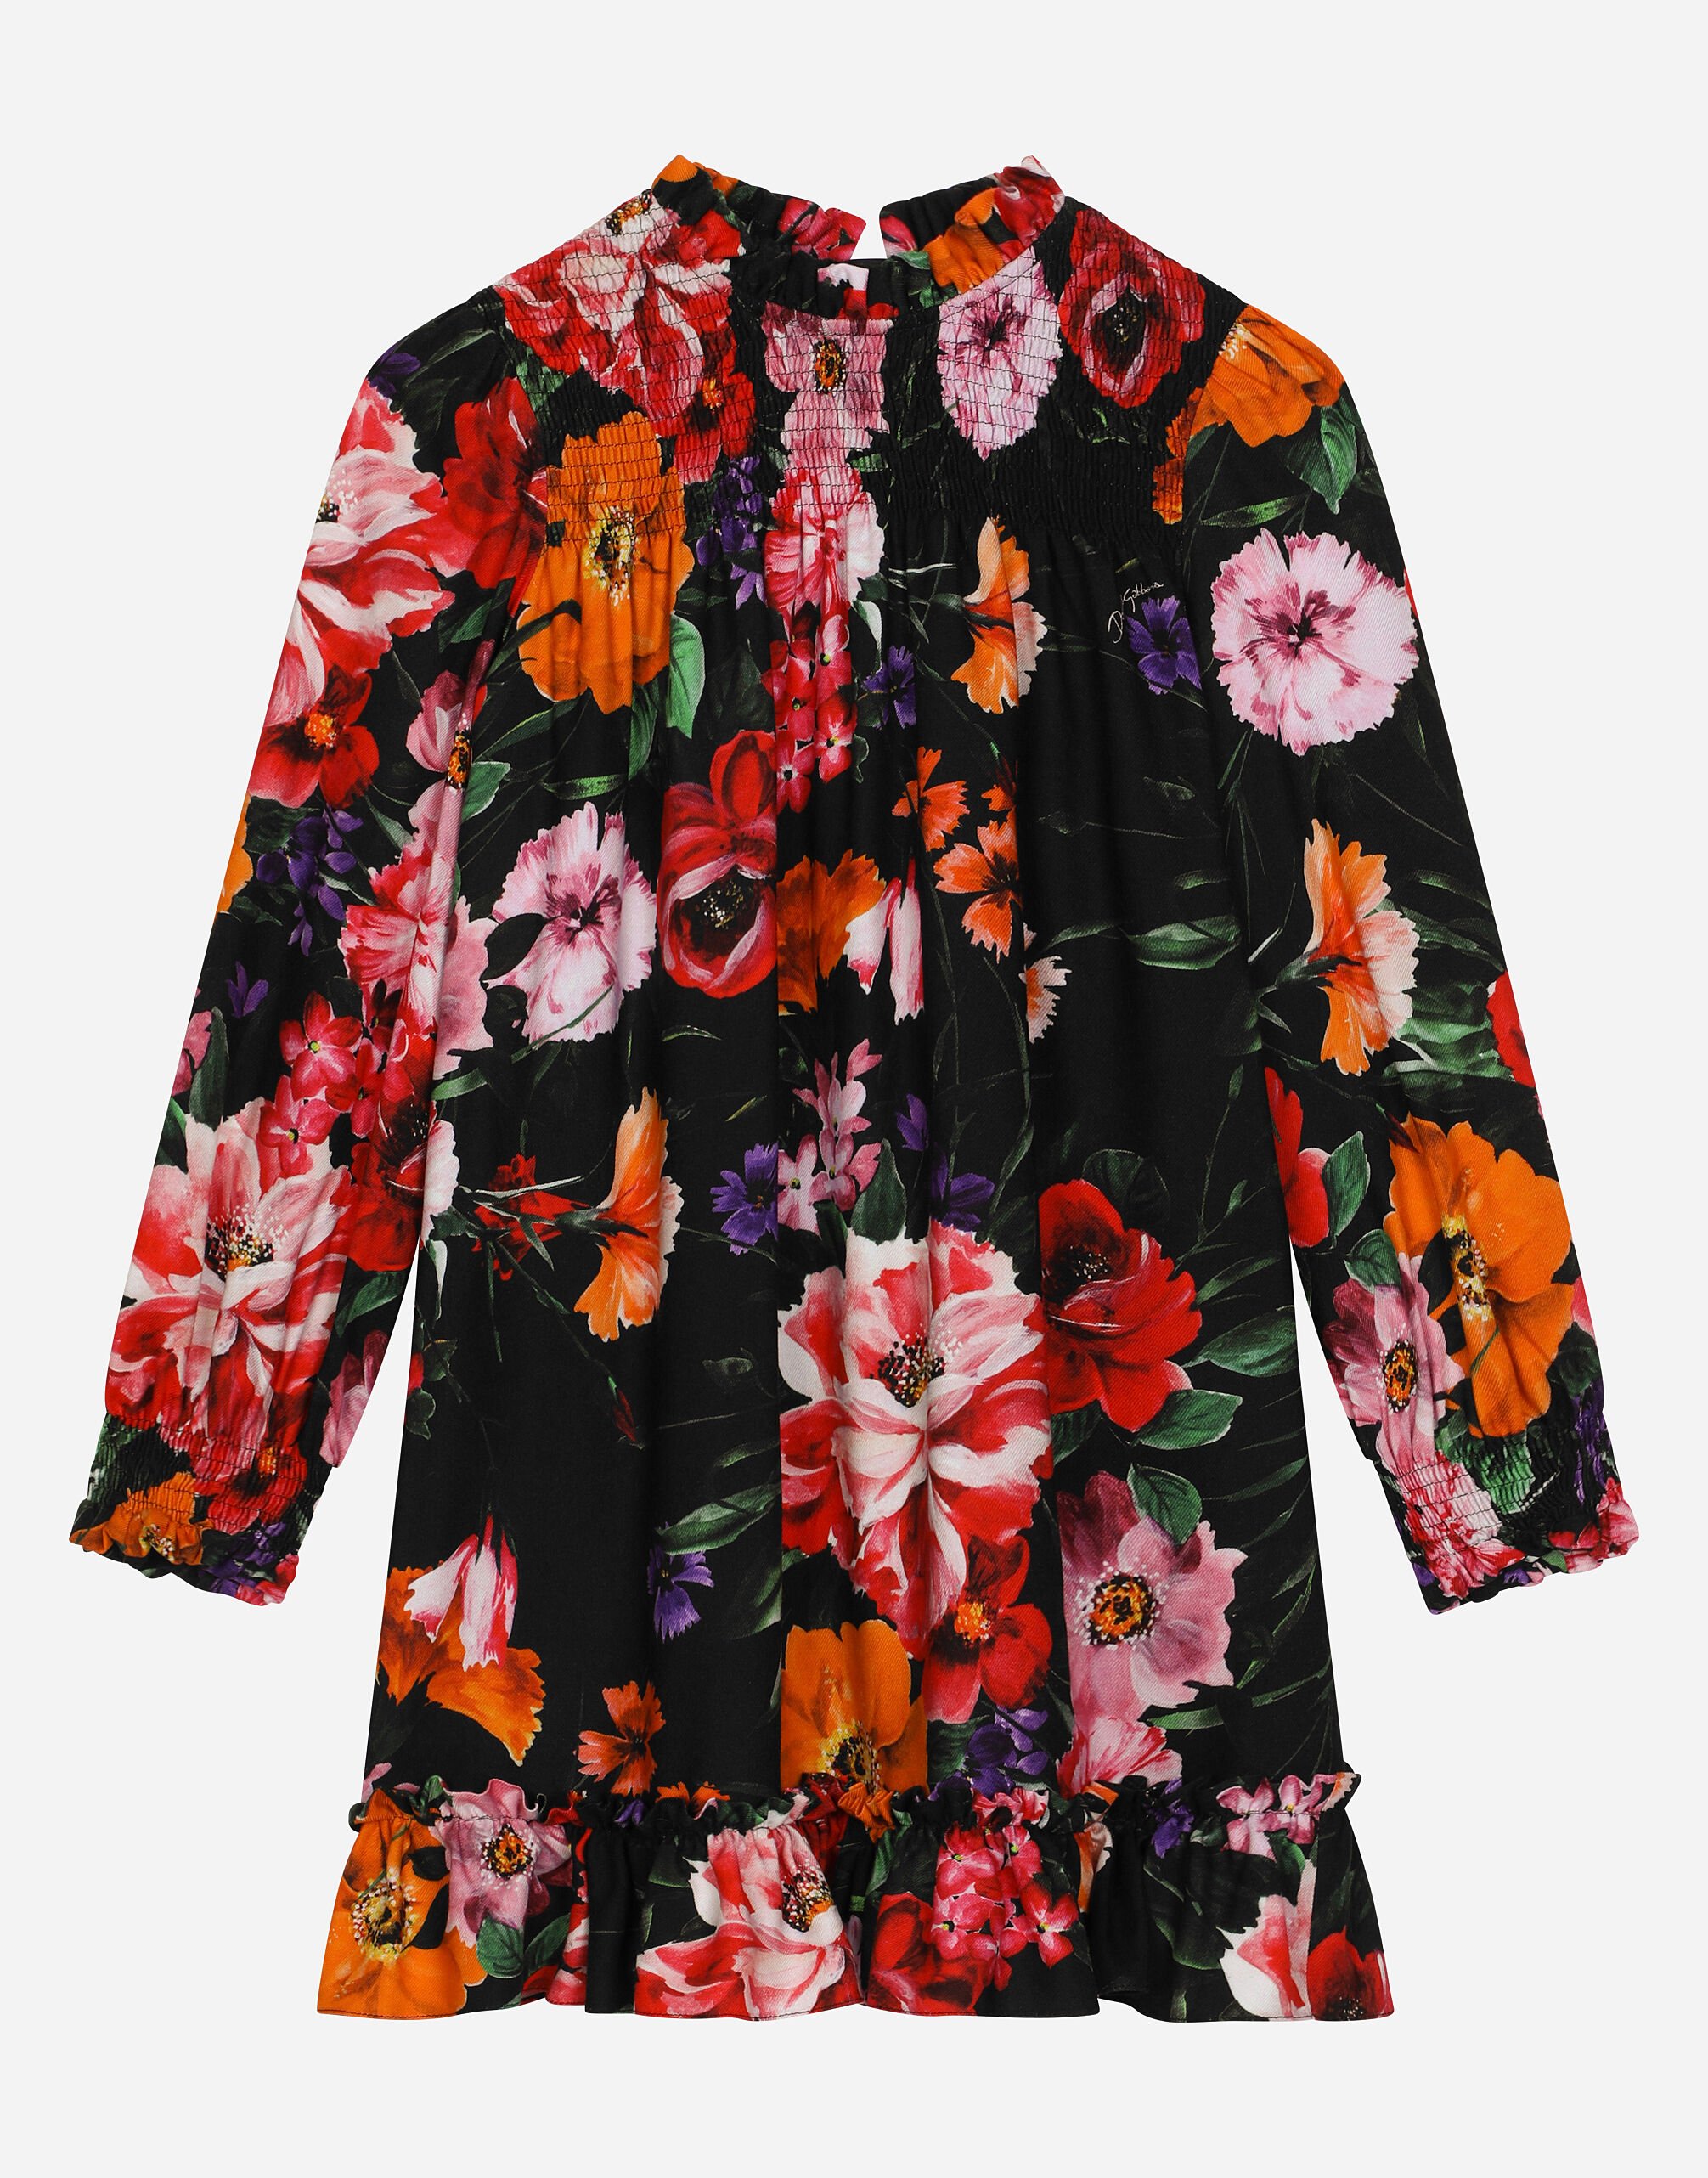 ${brand} Viyella dress with floral print over a black background ${colorDescription} ${masterID}